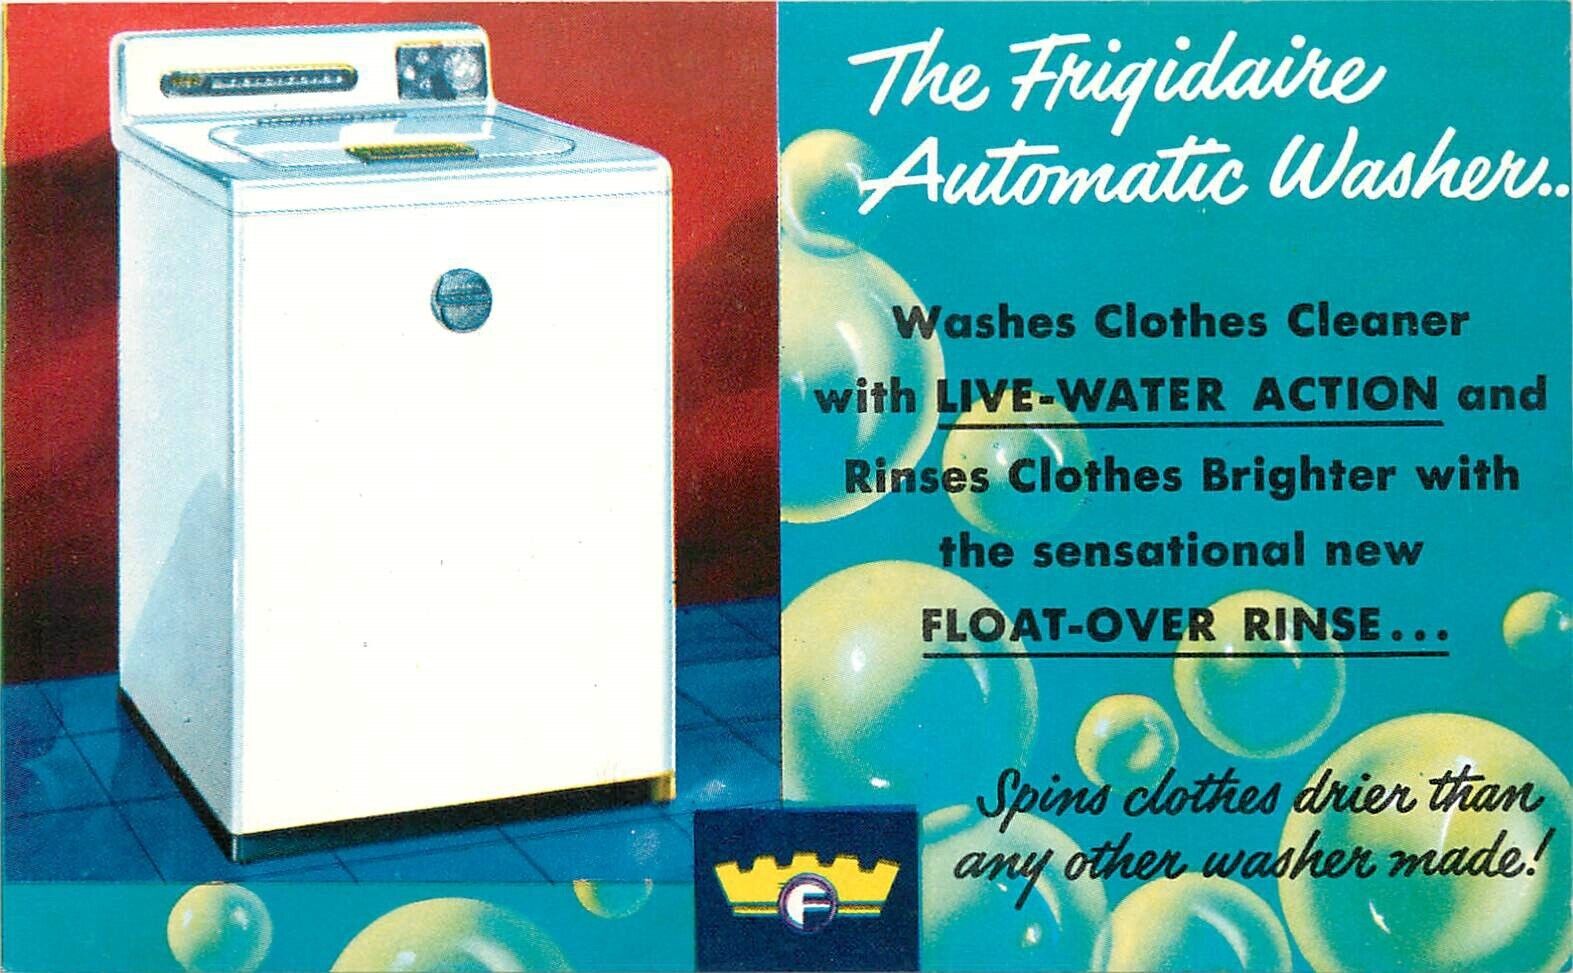 Postcard 19250s Frigidaire washer advertising undivided TP24-1423